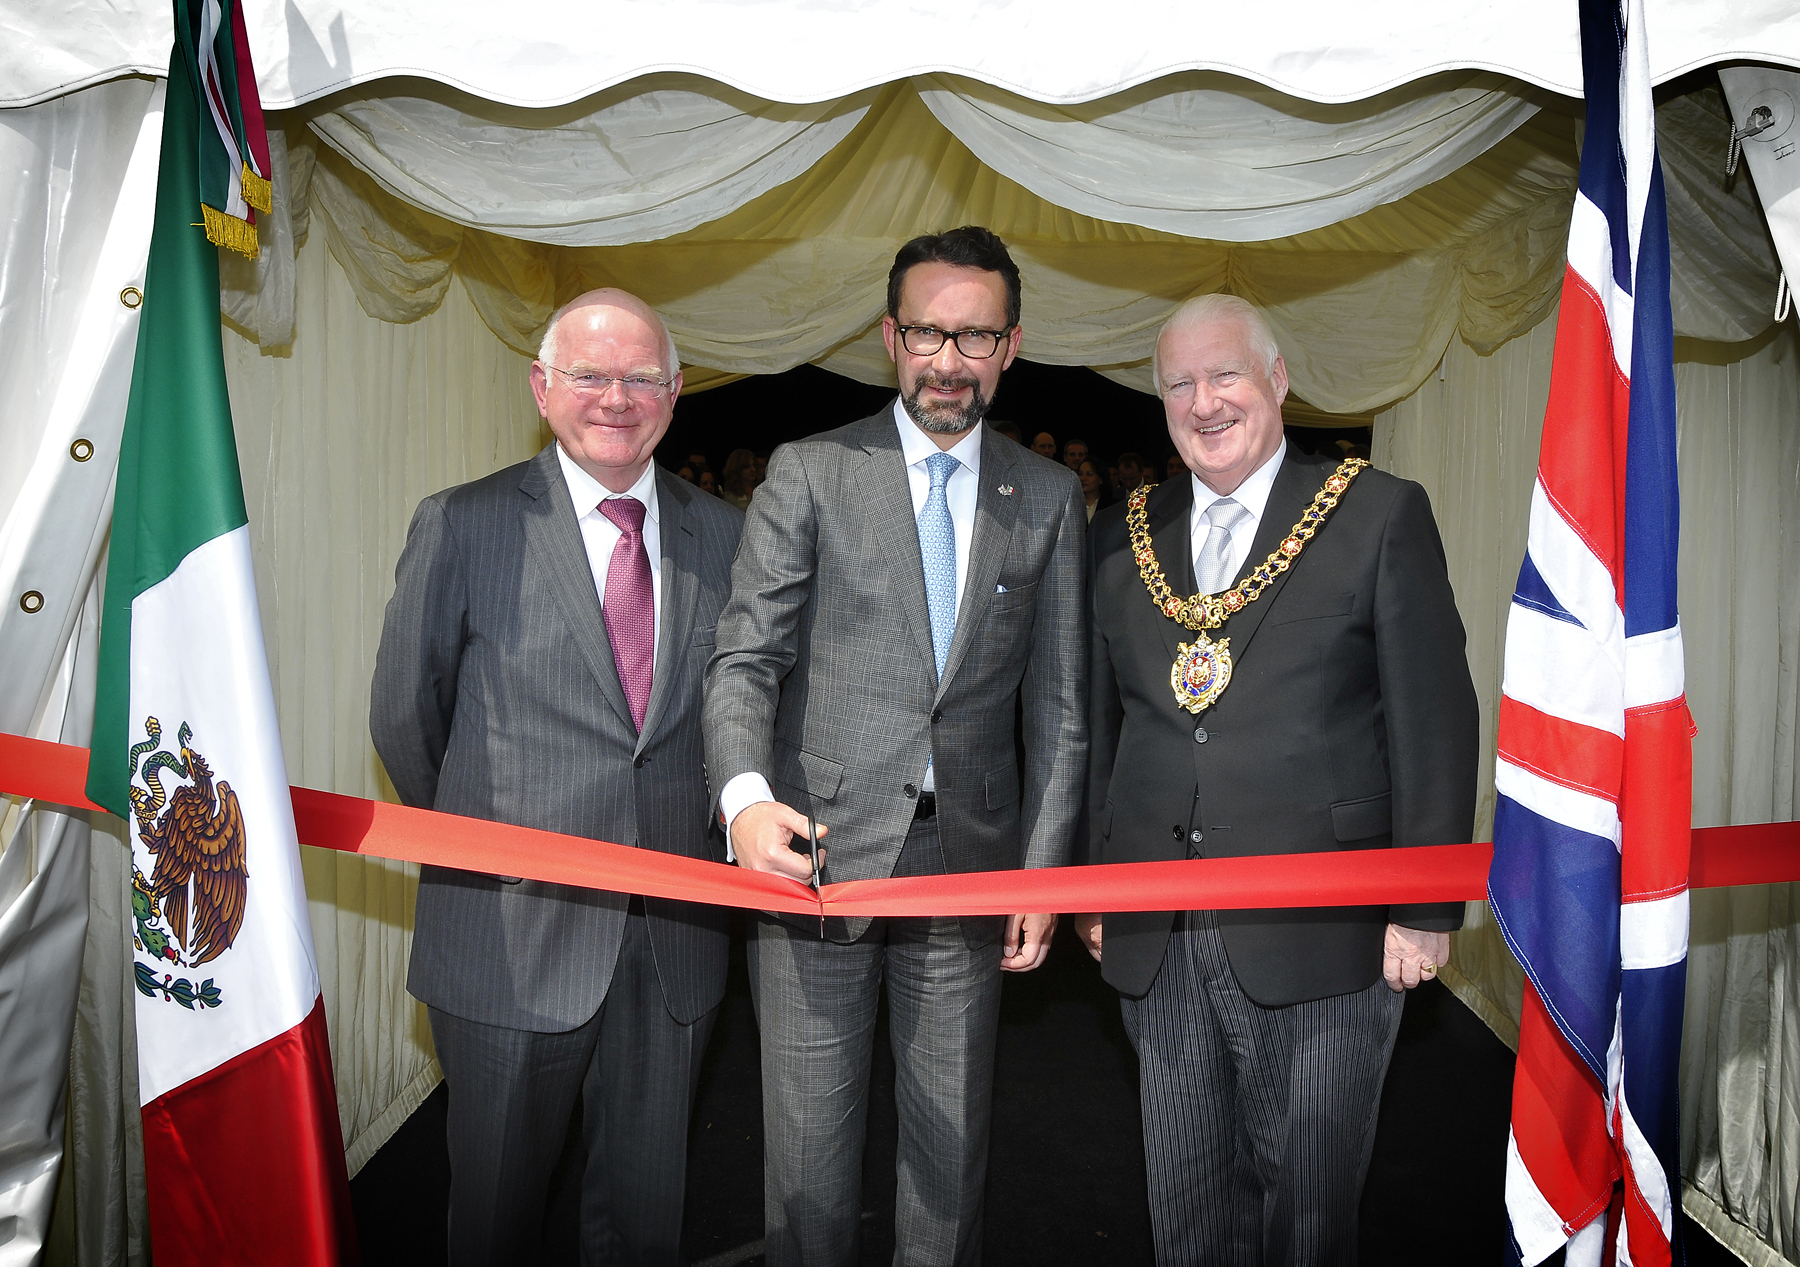 Pictured (l-r) are Tim Scott, Chairman of ENER-G and Honorary Consul of Mexico North of England; Ambassador of Mexico, Diego Gomez Pickering, and Lord Mayor of Manchester Councillor Paul Murphy OBE.